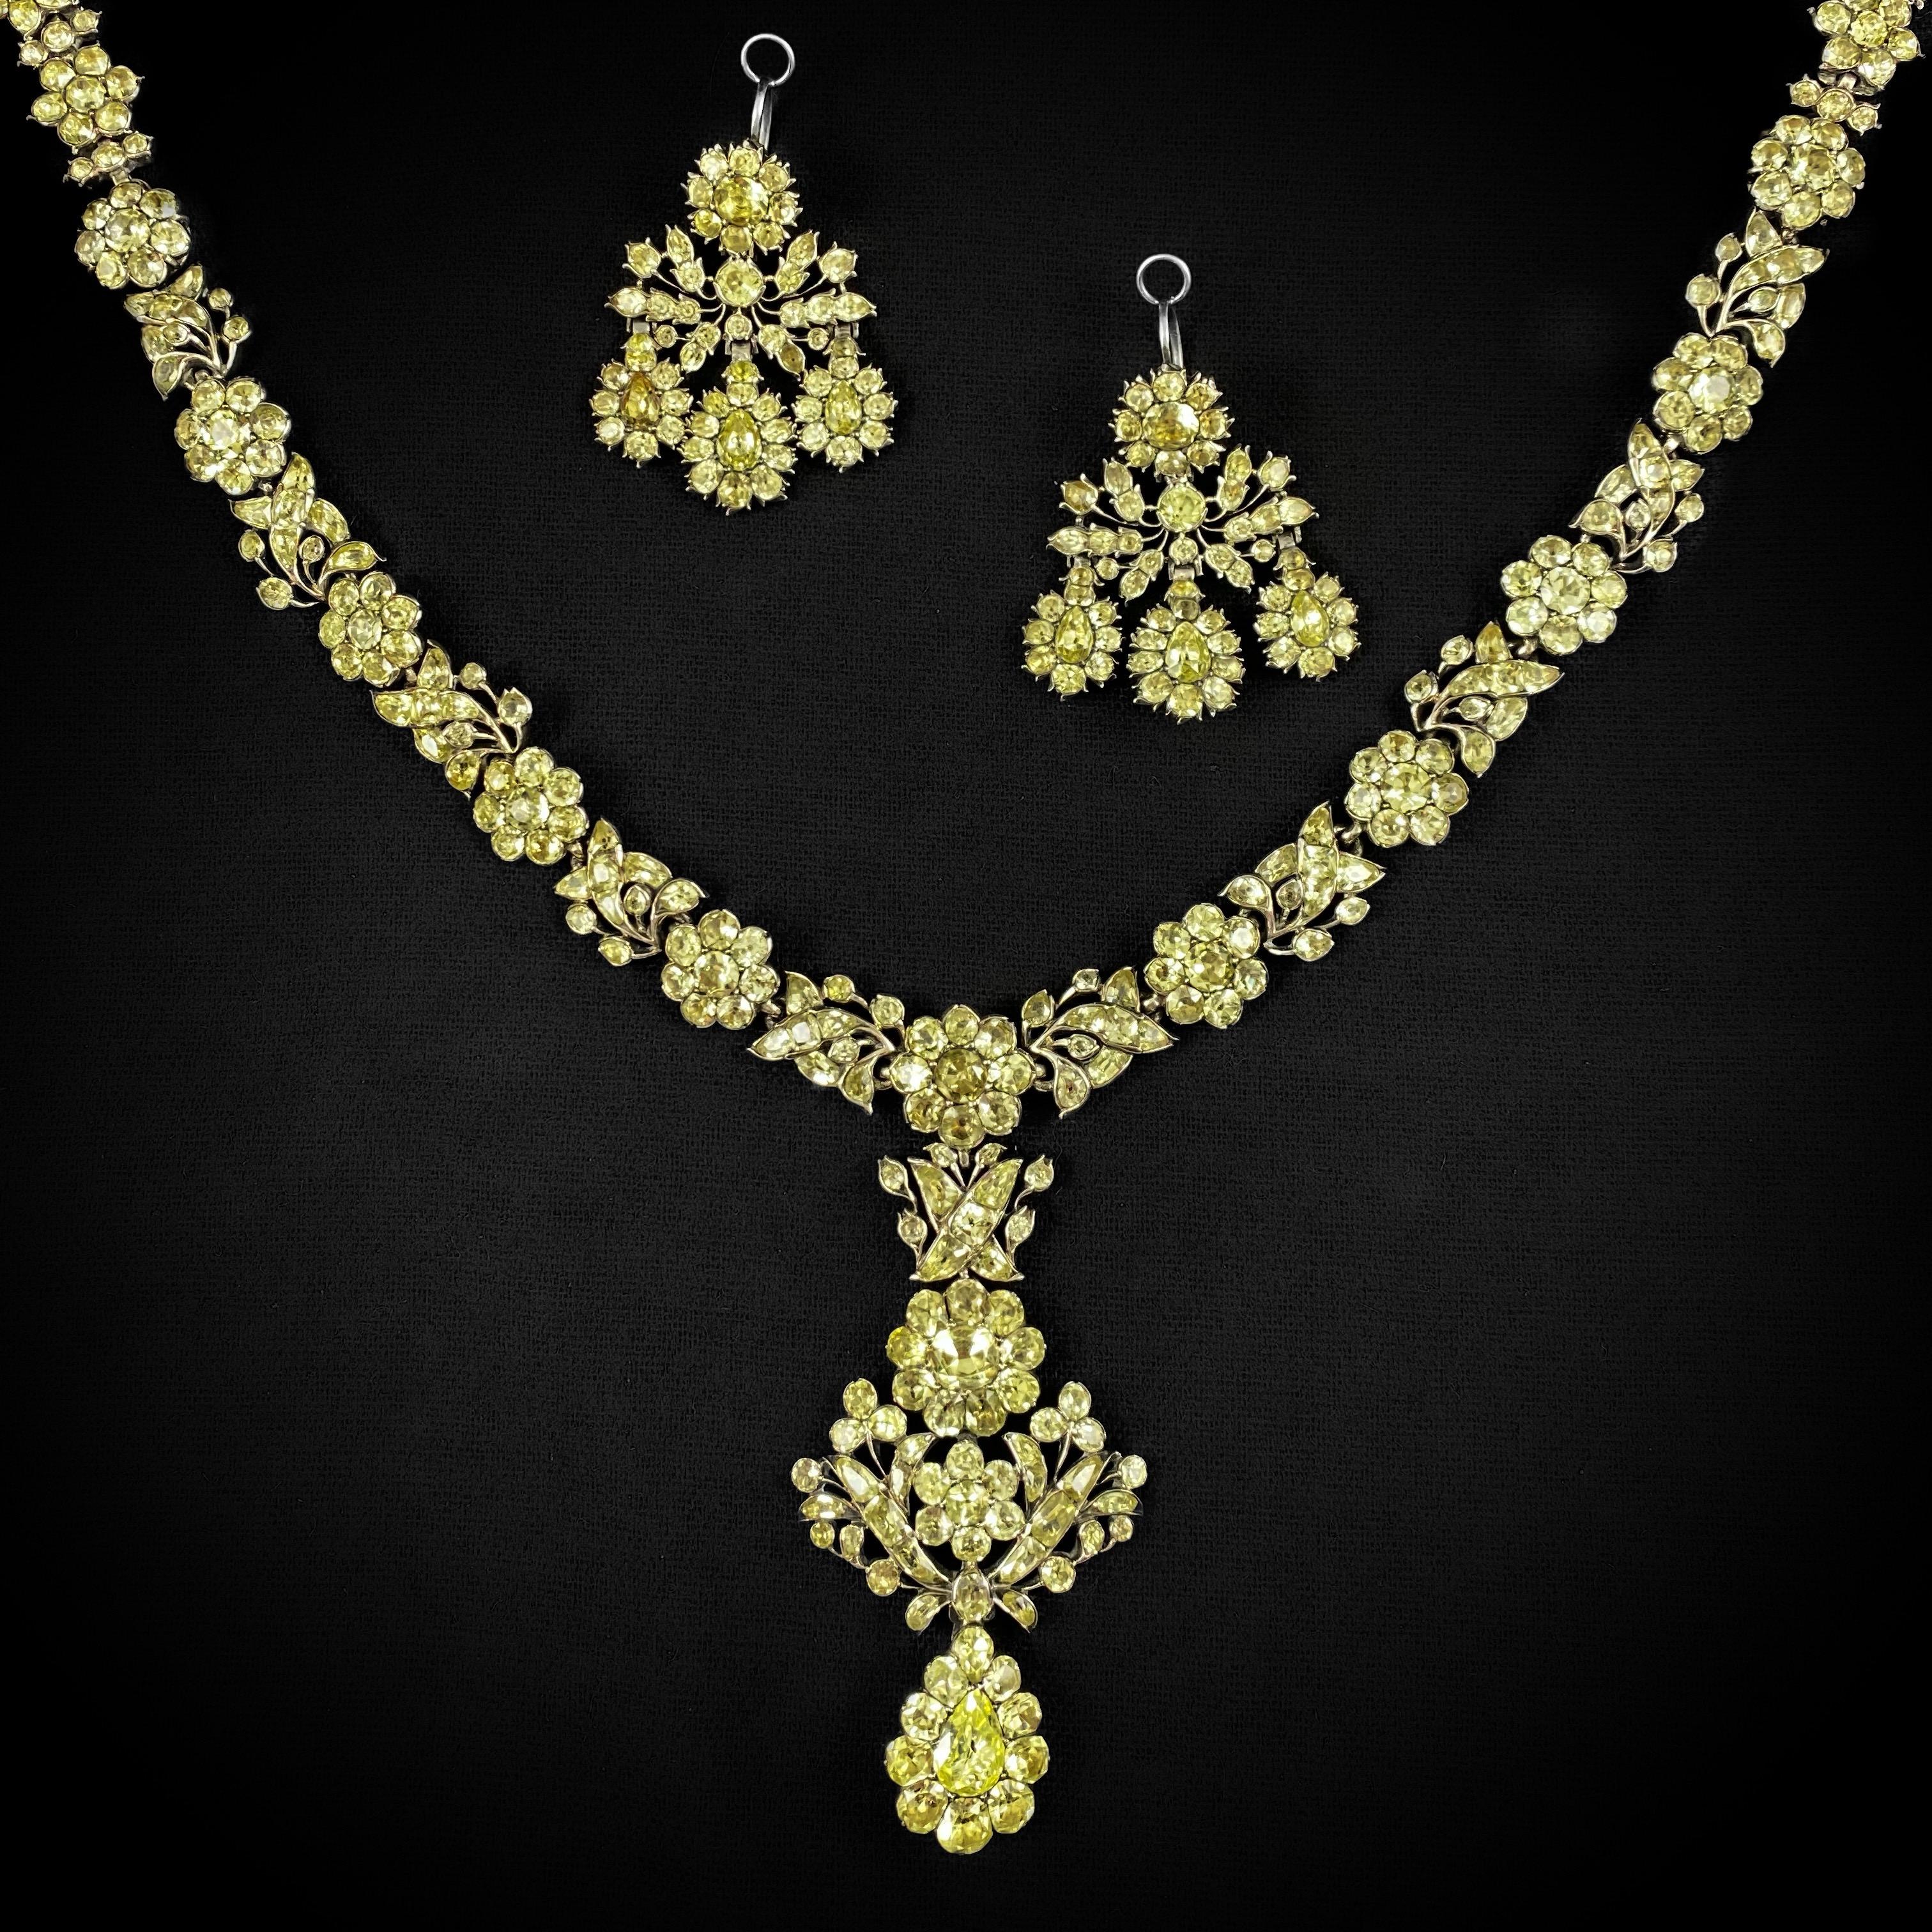 Museum-quality rare and important antique 18th century chrysolite chrysoberyl girandole earrings and necklace demi-parure mounted in closed-back silver, Portuguese, circa 1770, fitted in a later Victorian 19th century case. The necklace is designed